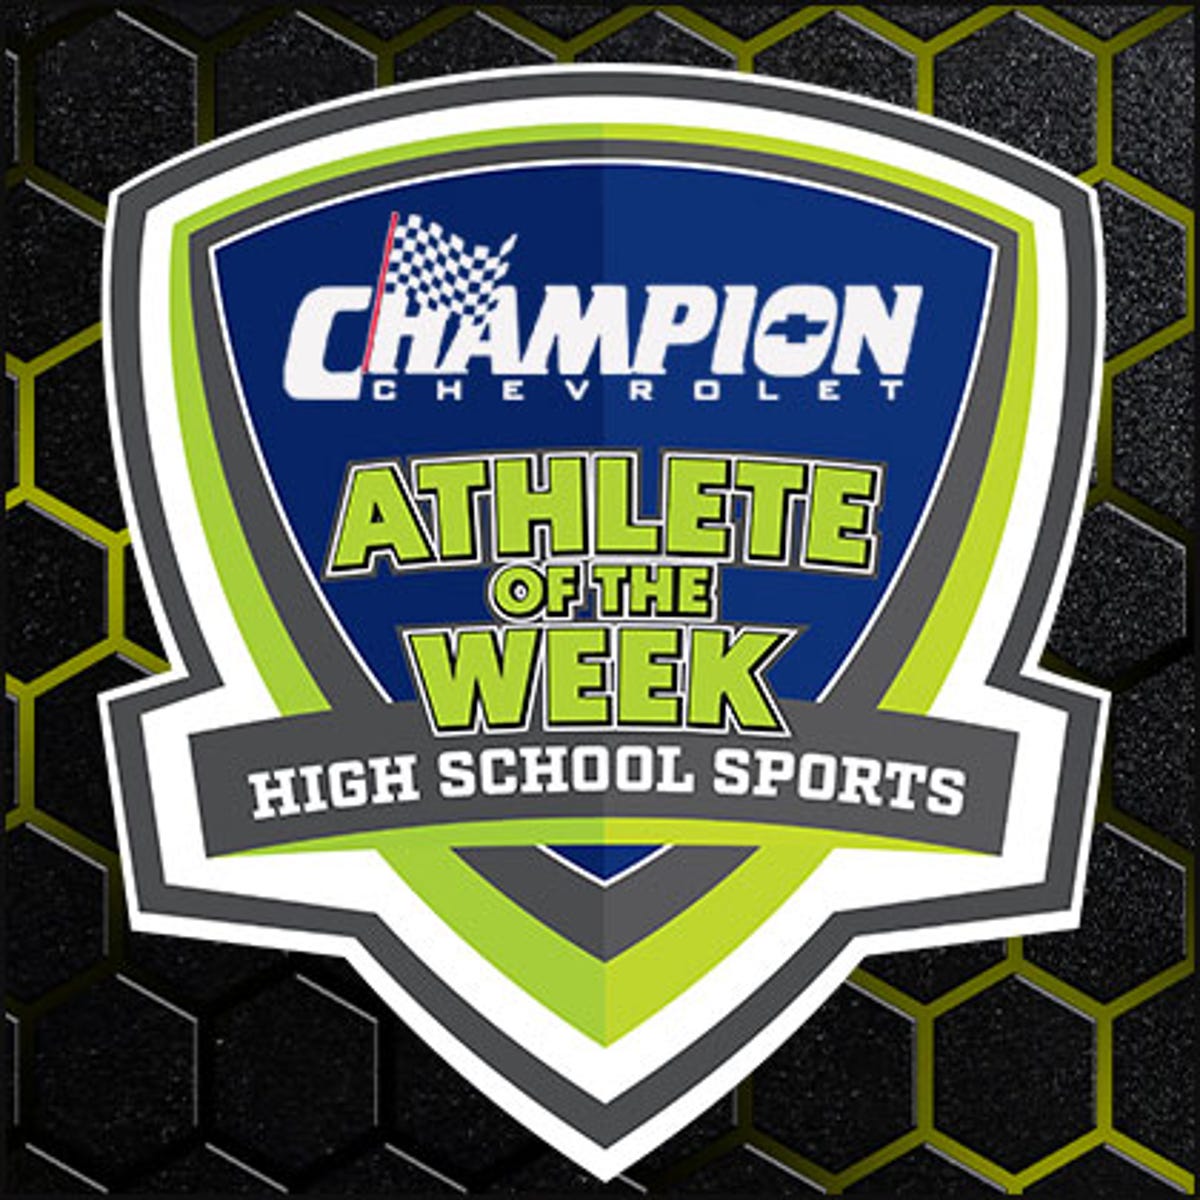 Top High School Athletes Shine: Champion Chevrolet Athletes of the Week Nominees Revealed!